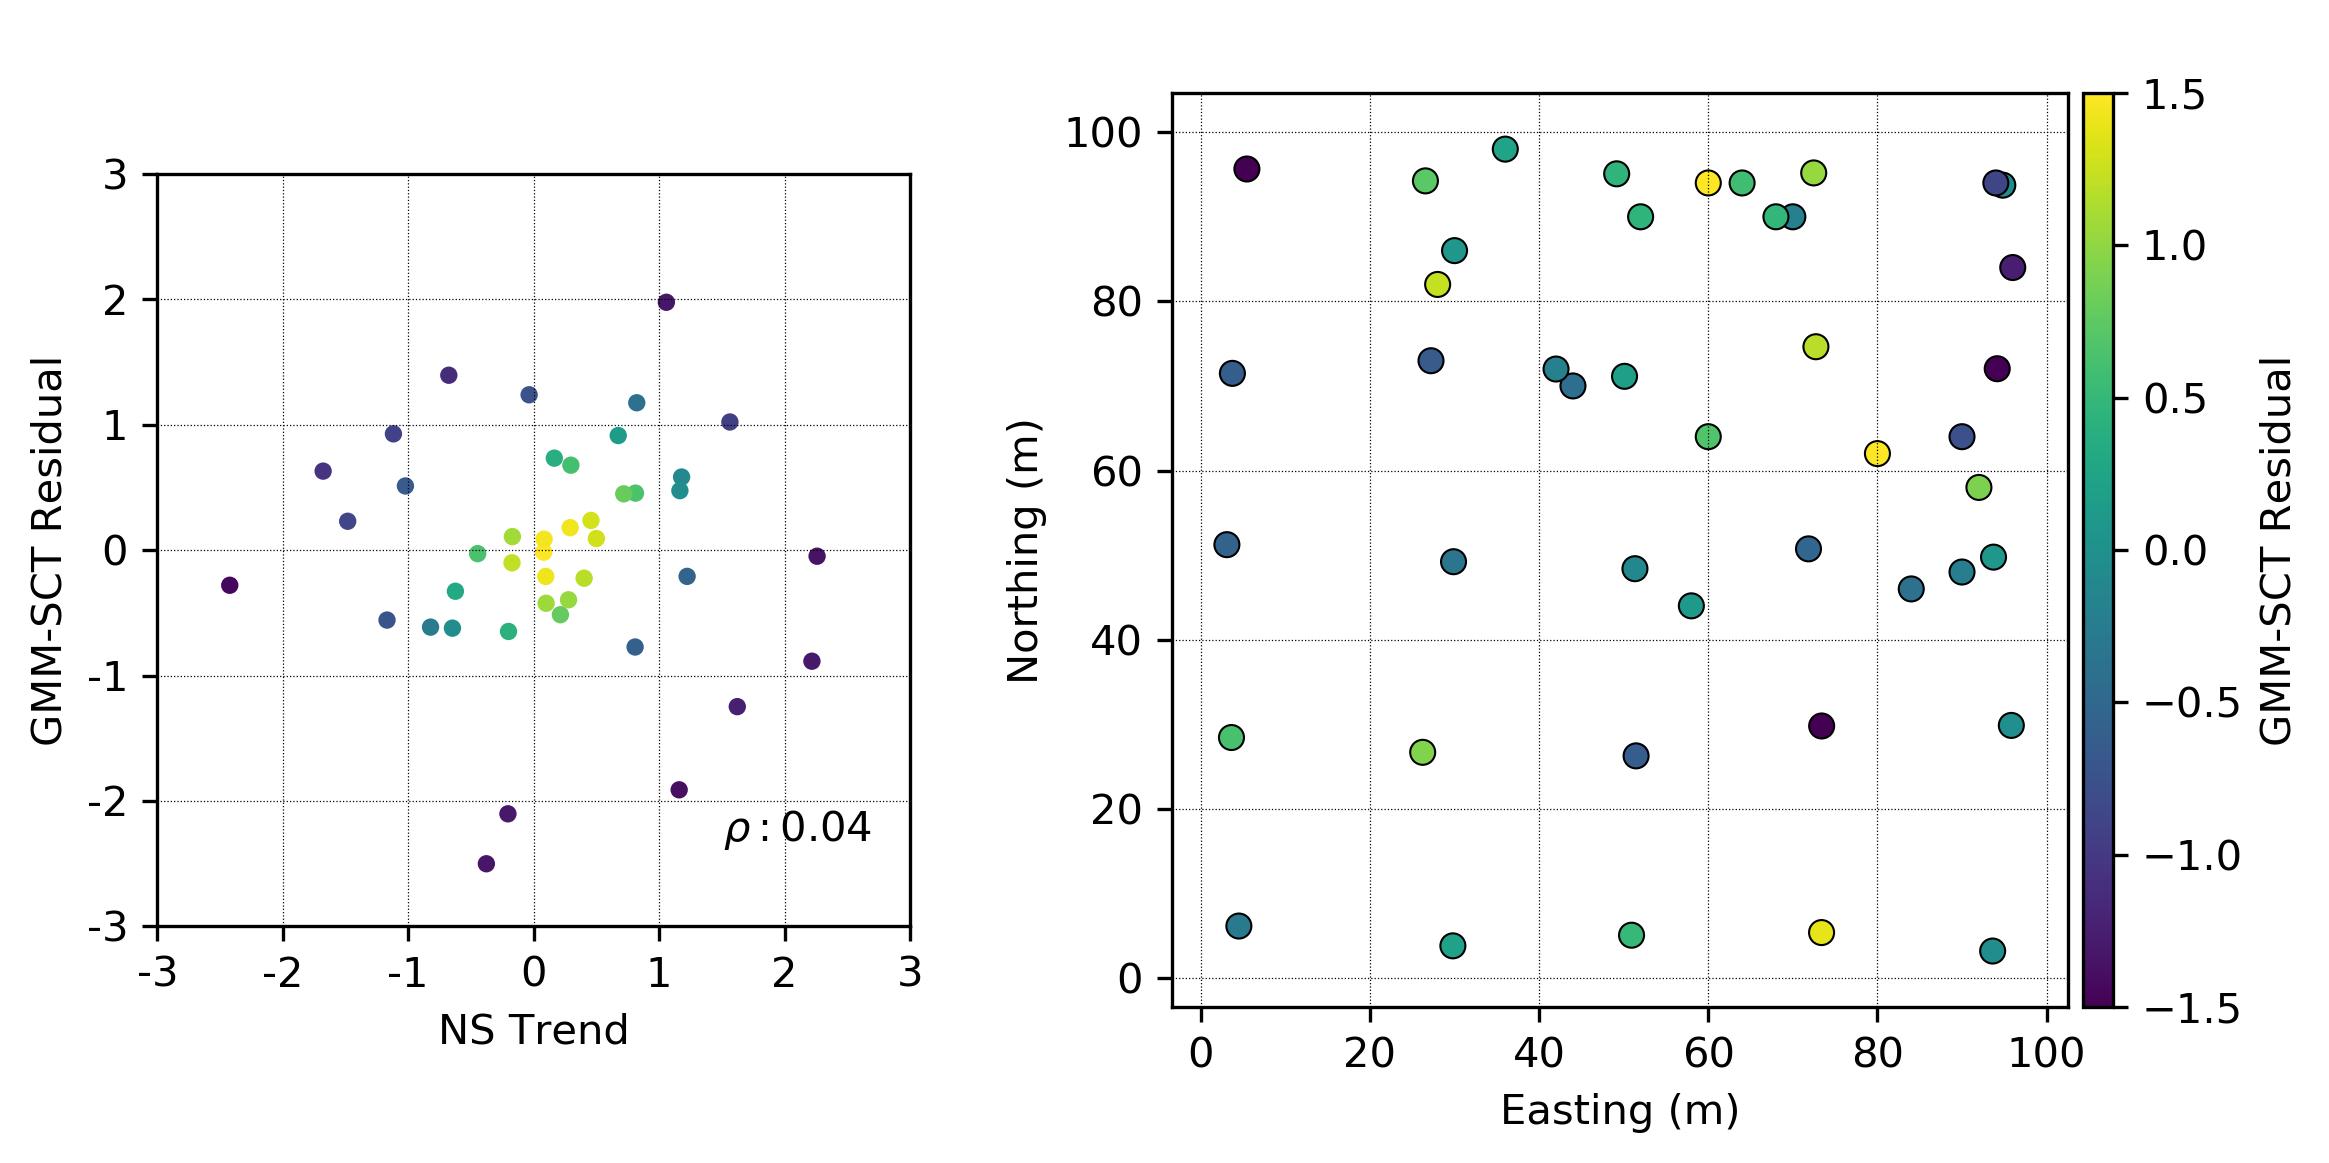 Normal score trend-residual scatter plot (left) and location map of the residuals (right).